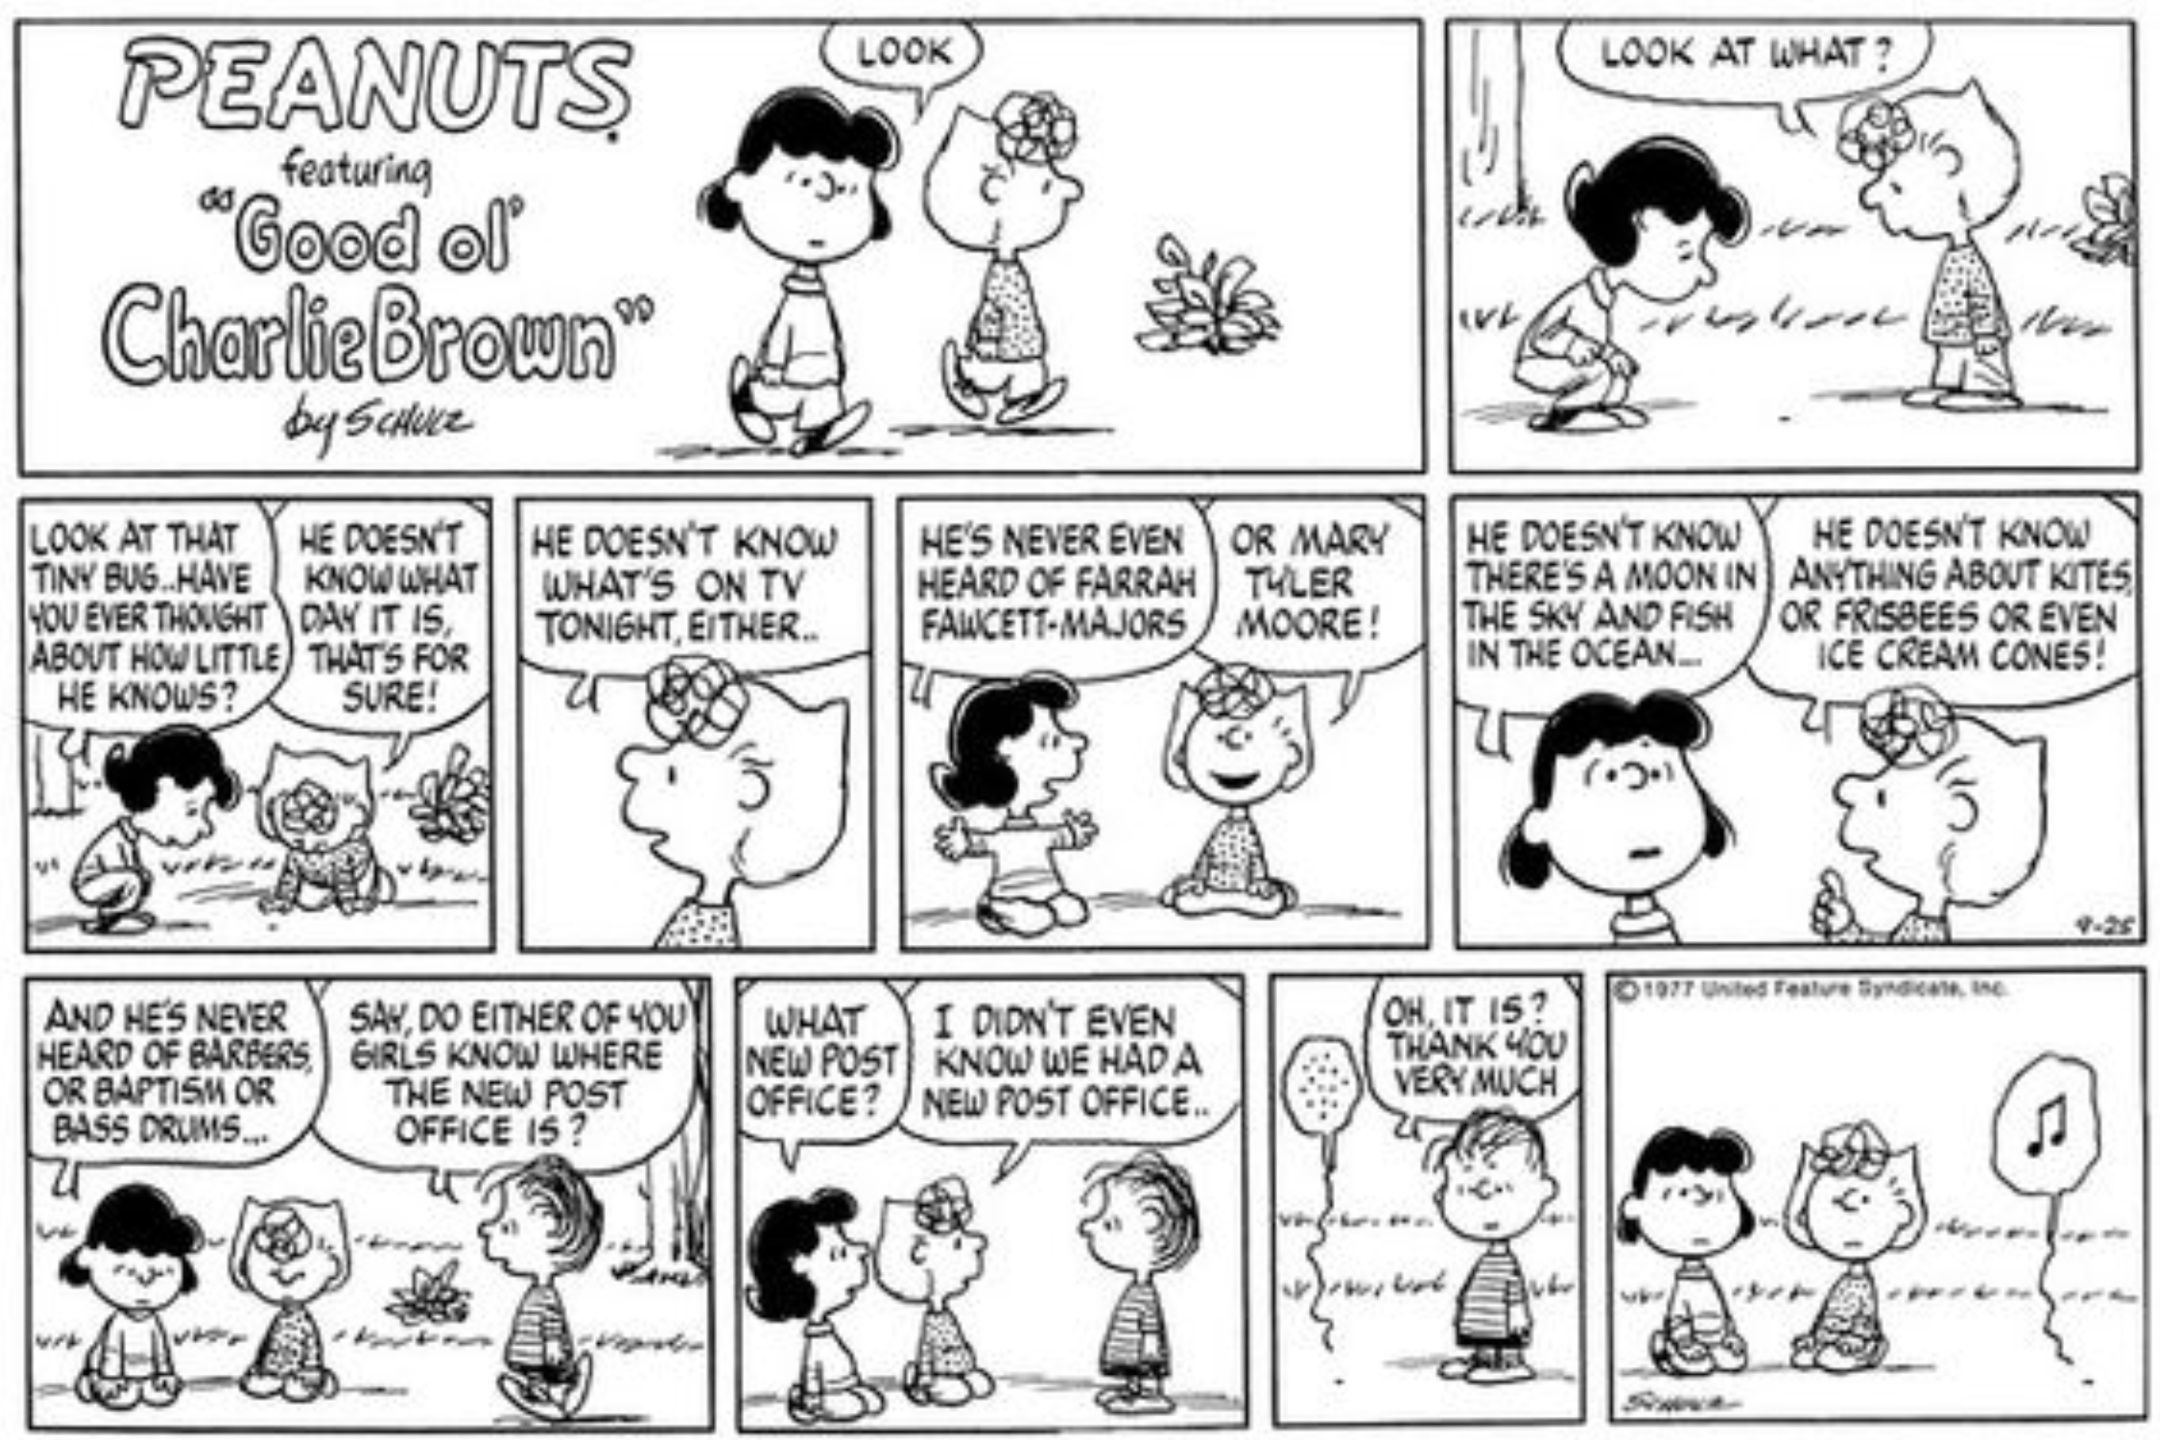 Lucy and Sally talking about Farrah Fawcett and Mary Tyler Moore in Peanuts.